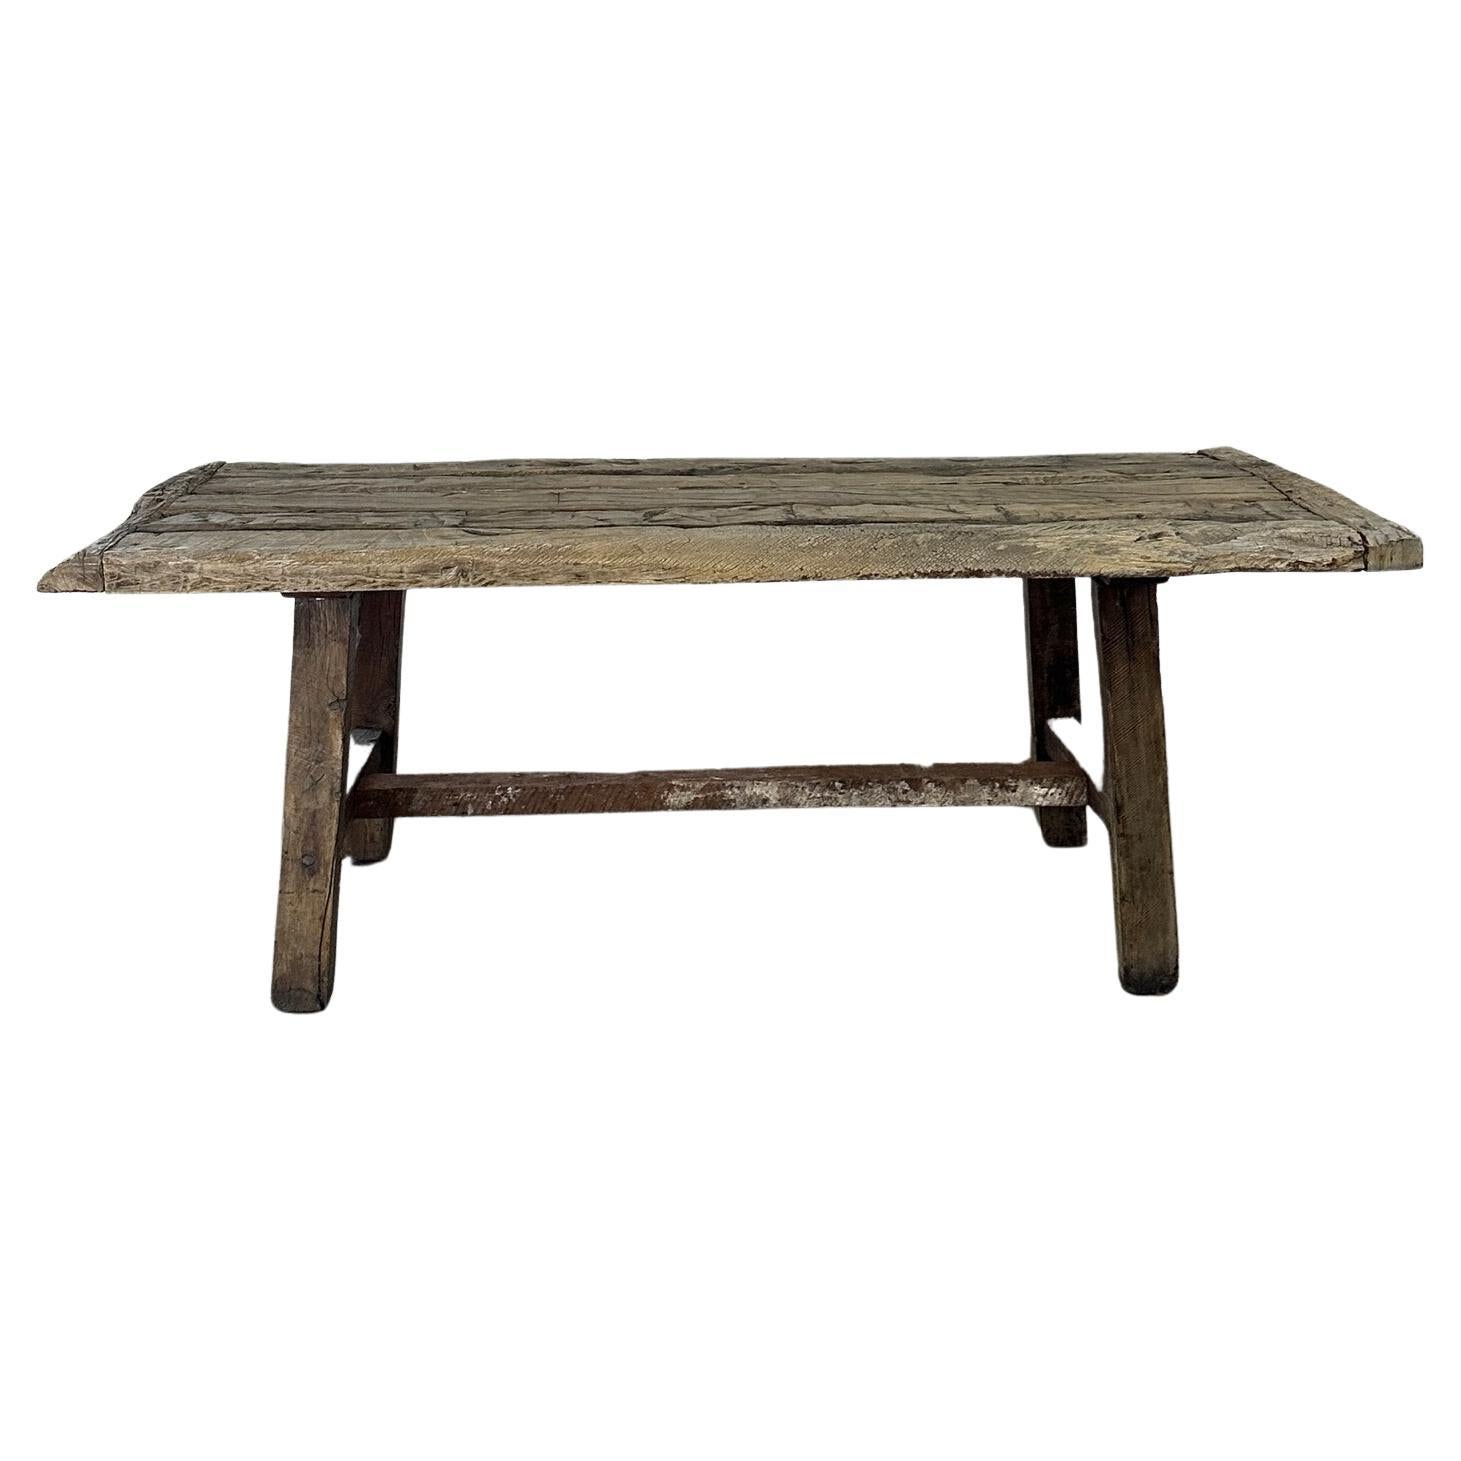 Early Primitive dining table